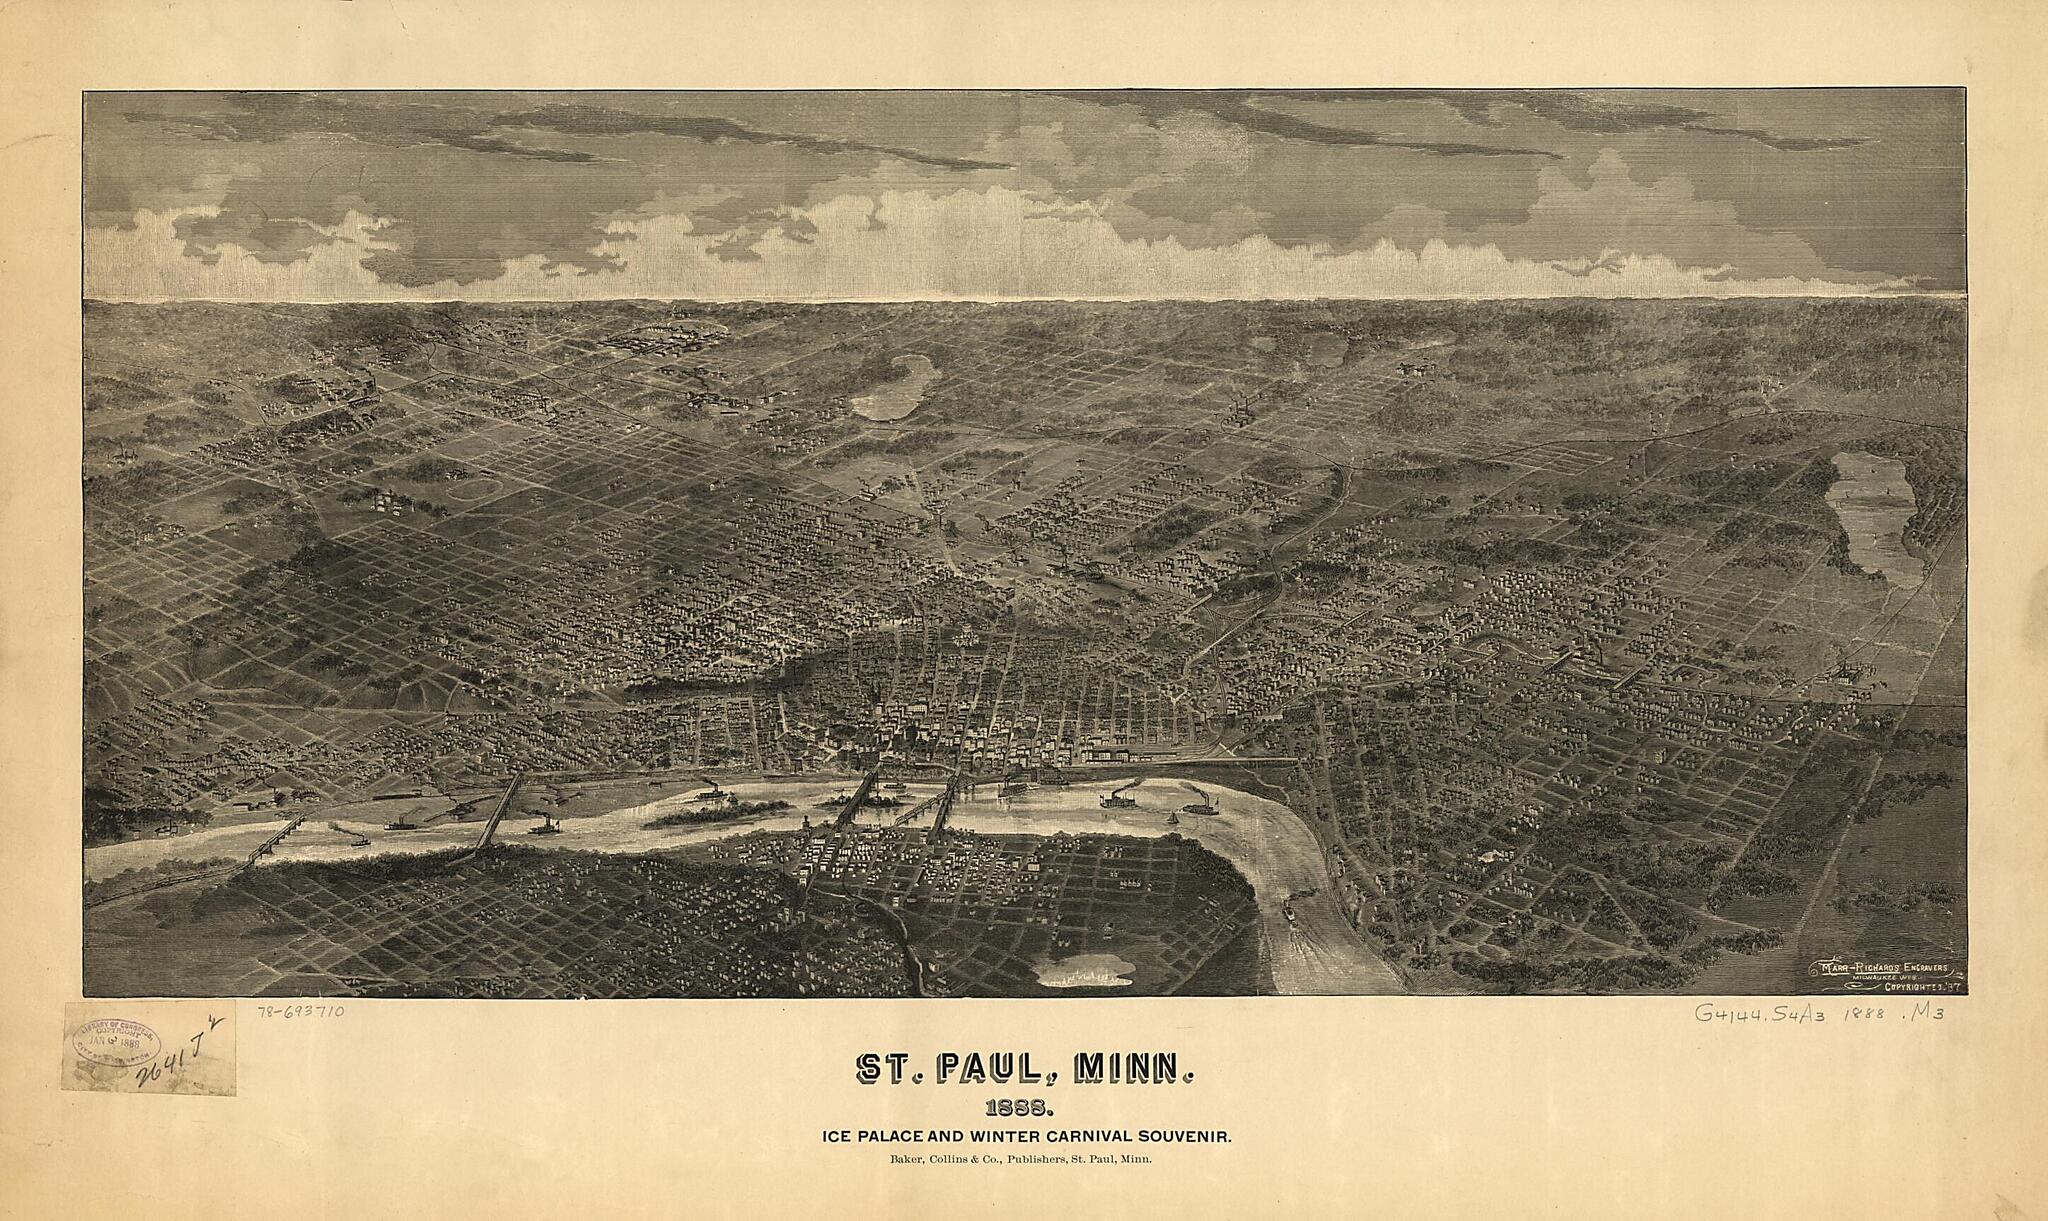 This old map of St. Paul, Minnesota : Ice Palace and Winter Carnival Souvenir from 1888 was created by Collins &amp; Co Baker,  Marr &amp; Richards Engraving Co in 1888